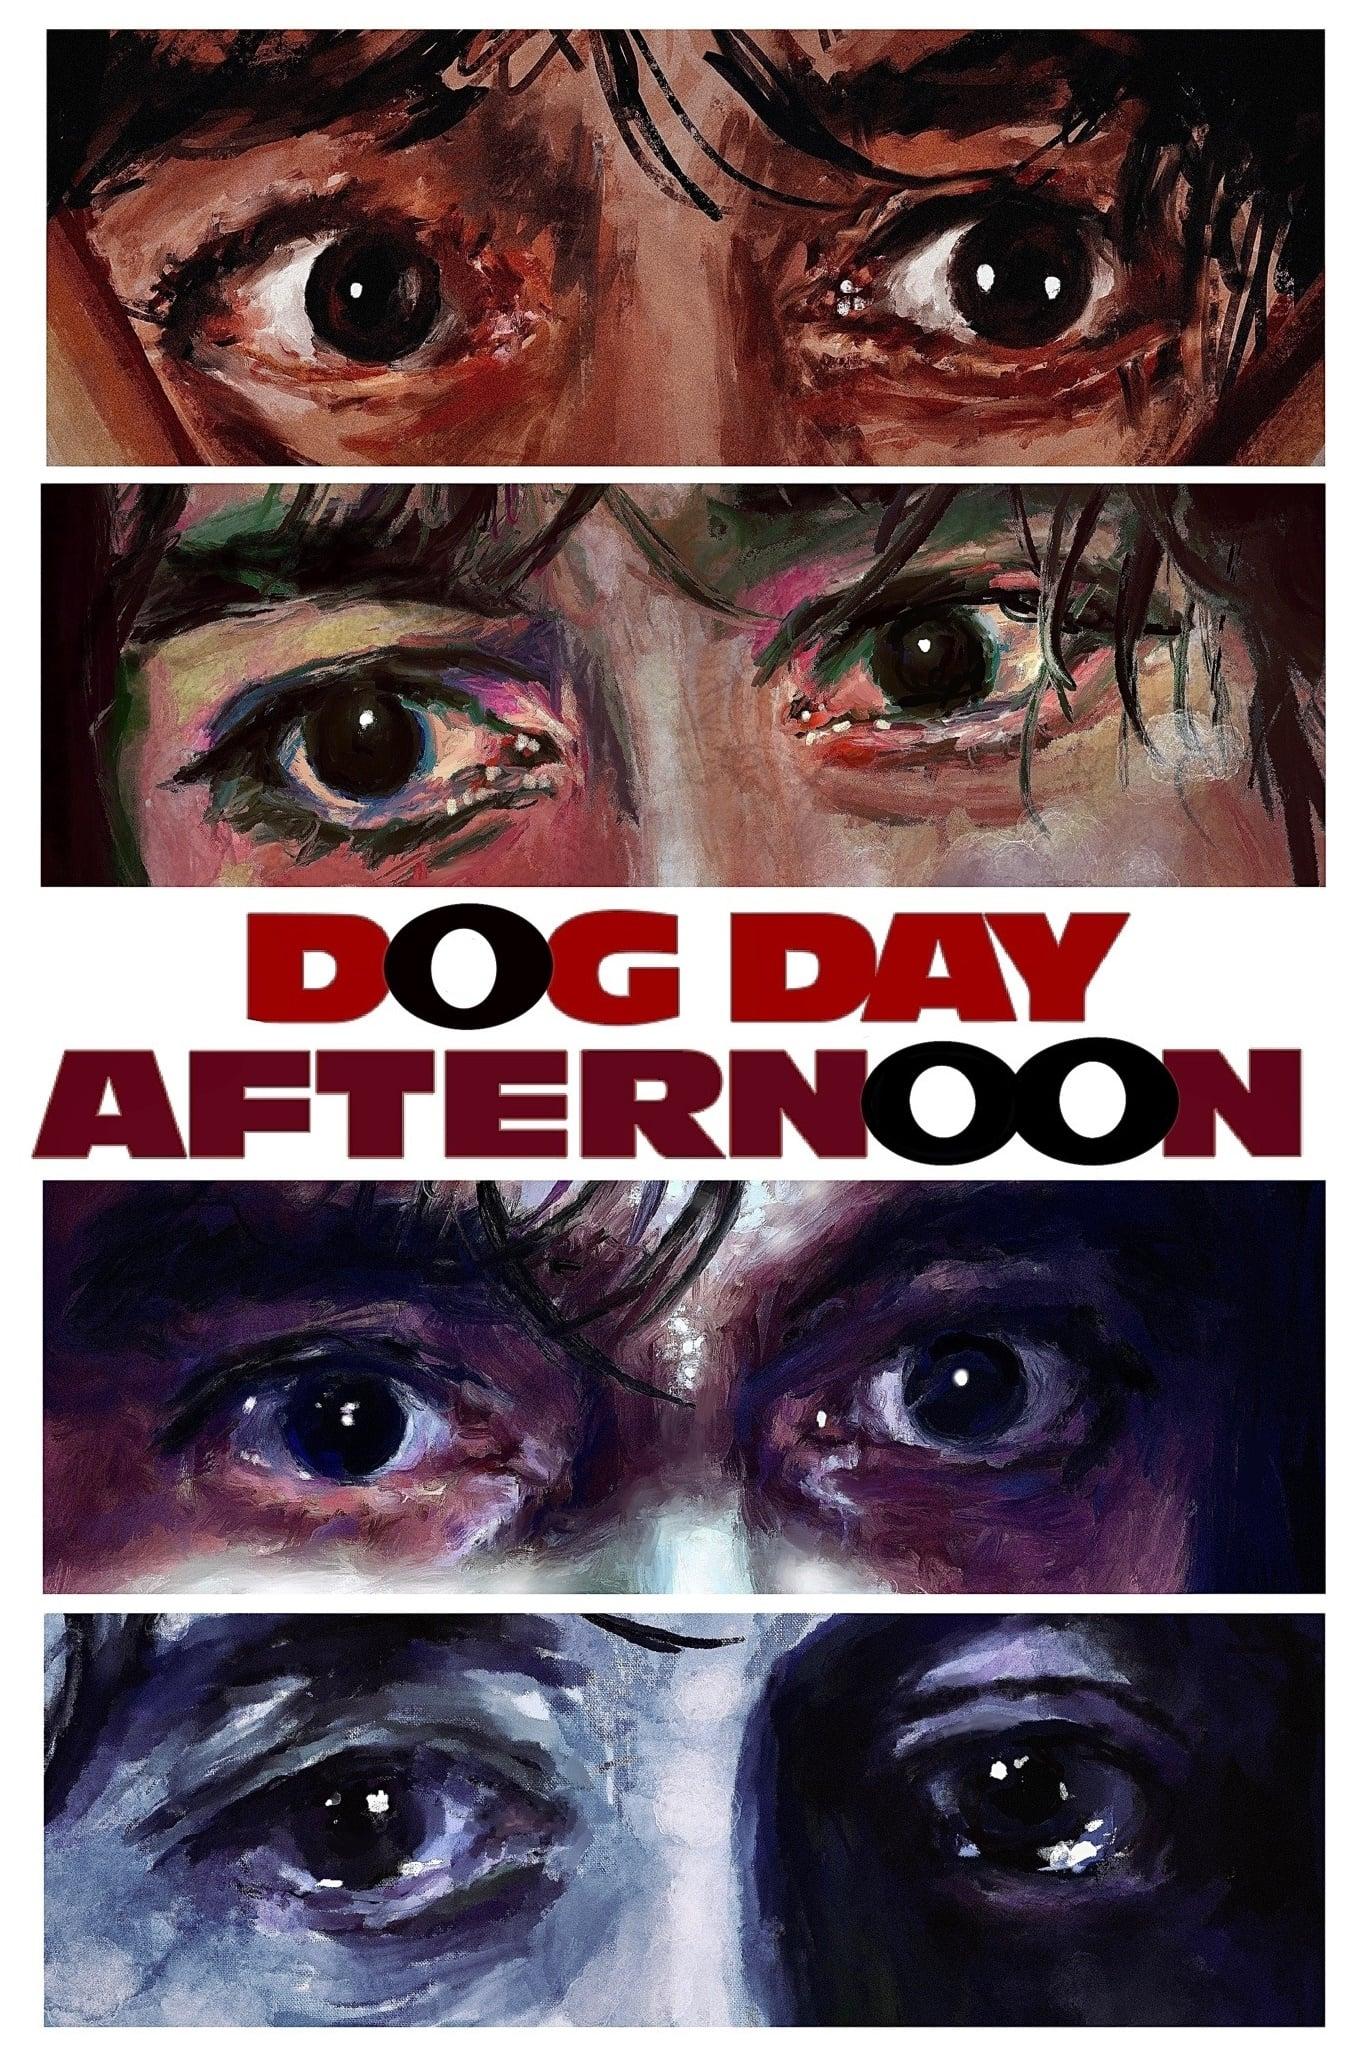 Dog Day Afternoon poster